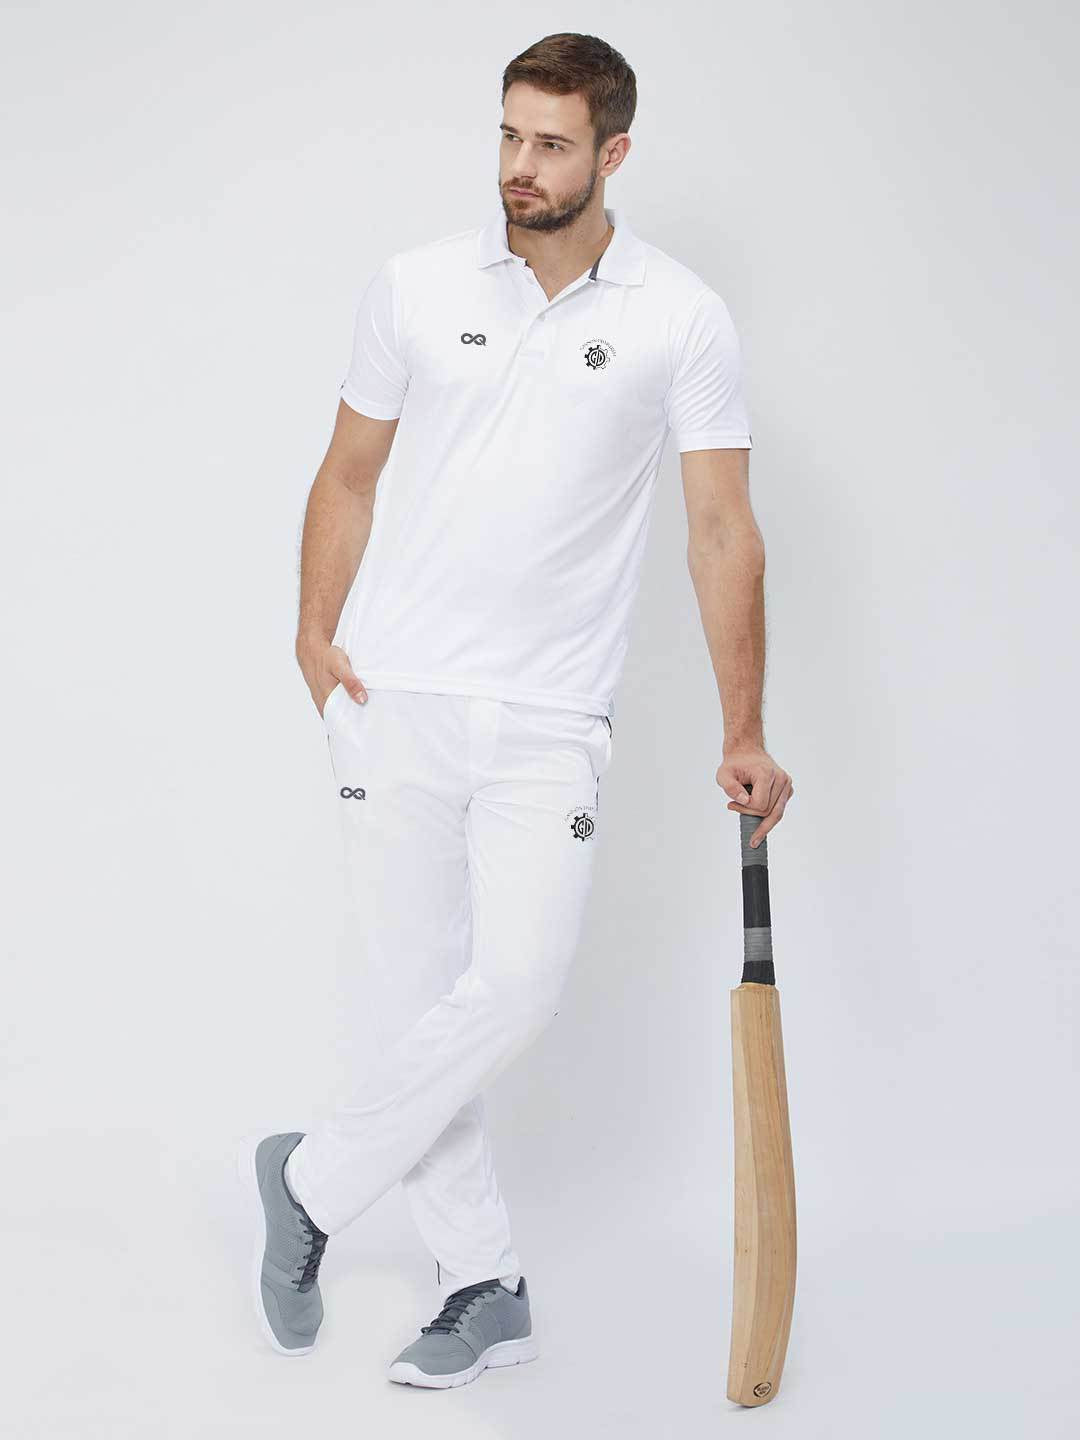 Indian Cricket Team Jersey Track Trousers Jackets Polo Tshirts - Buy Indian  Cricket Team Jersey Track Trousers Jackets Polo Tshirts online in India